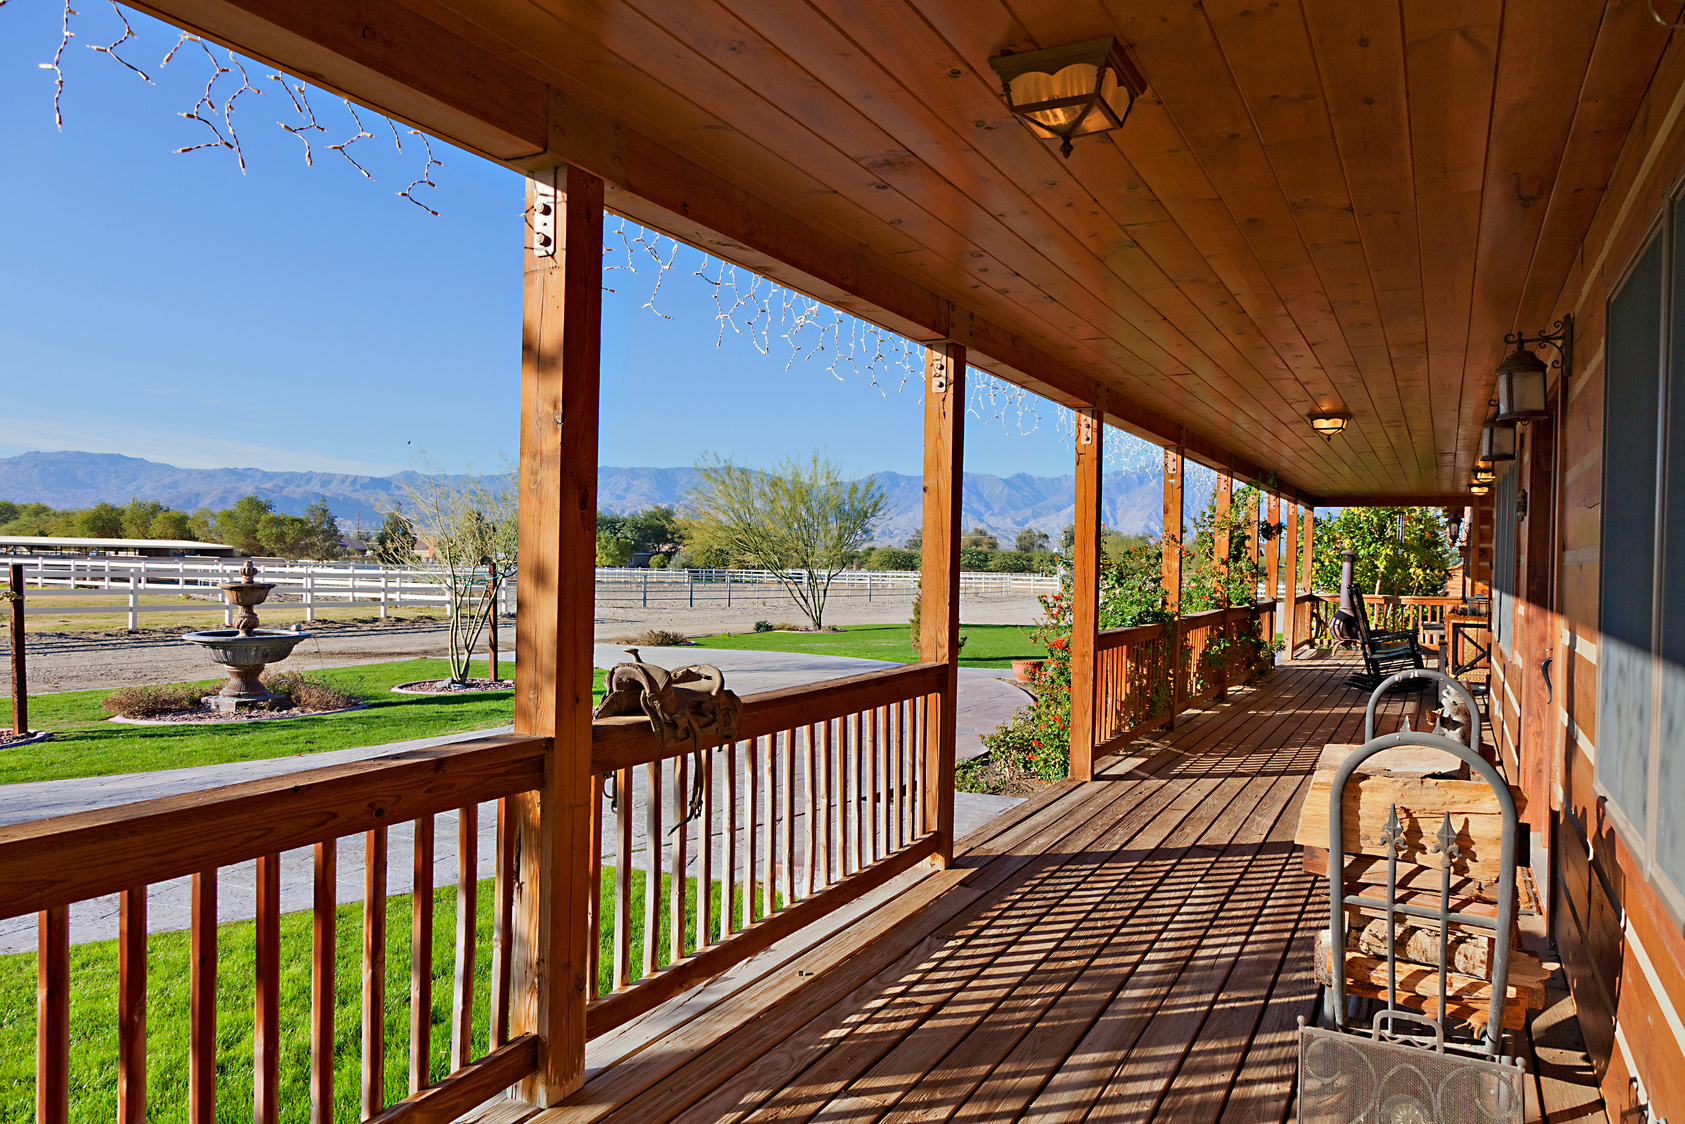 Ranch porch overlooking horse stables